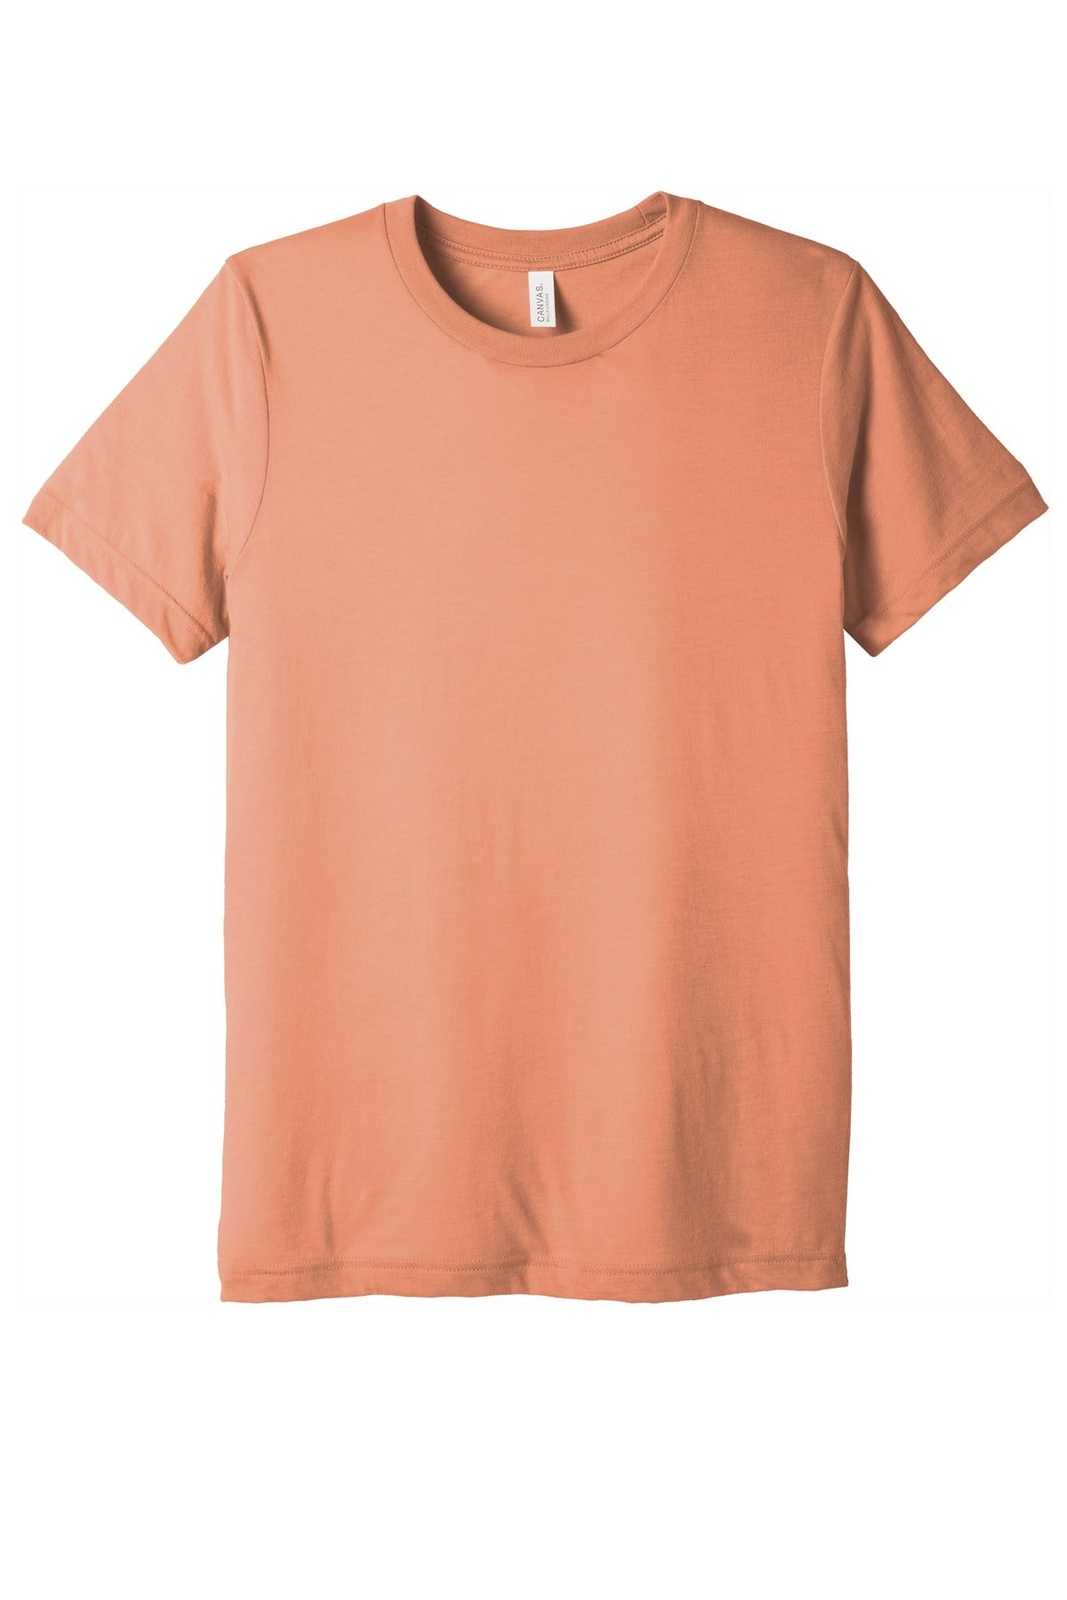 Bella + Canvas 3413 Unisex Triblend Short Sleeve Tee - Sunset Triblend - HIT a Double